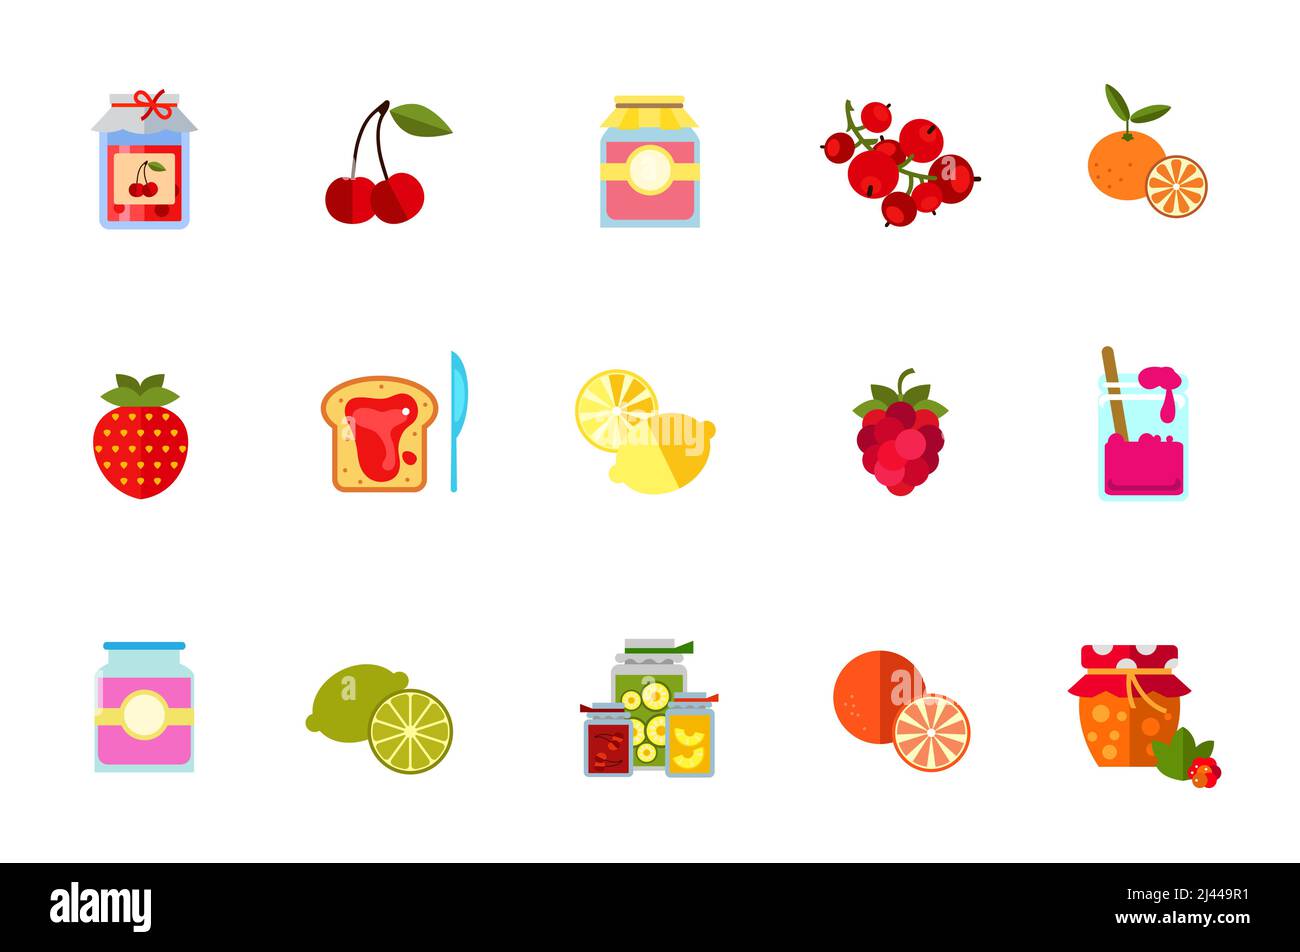 Berries and fruits icon set. Jam Jar With Paper Cherry Jam Jar With Label Red Currant Bunch Tangerine Strawberry Jam On Bread And Knife Lemon Raspberr Stock Vector